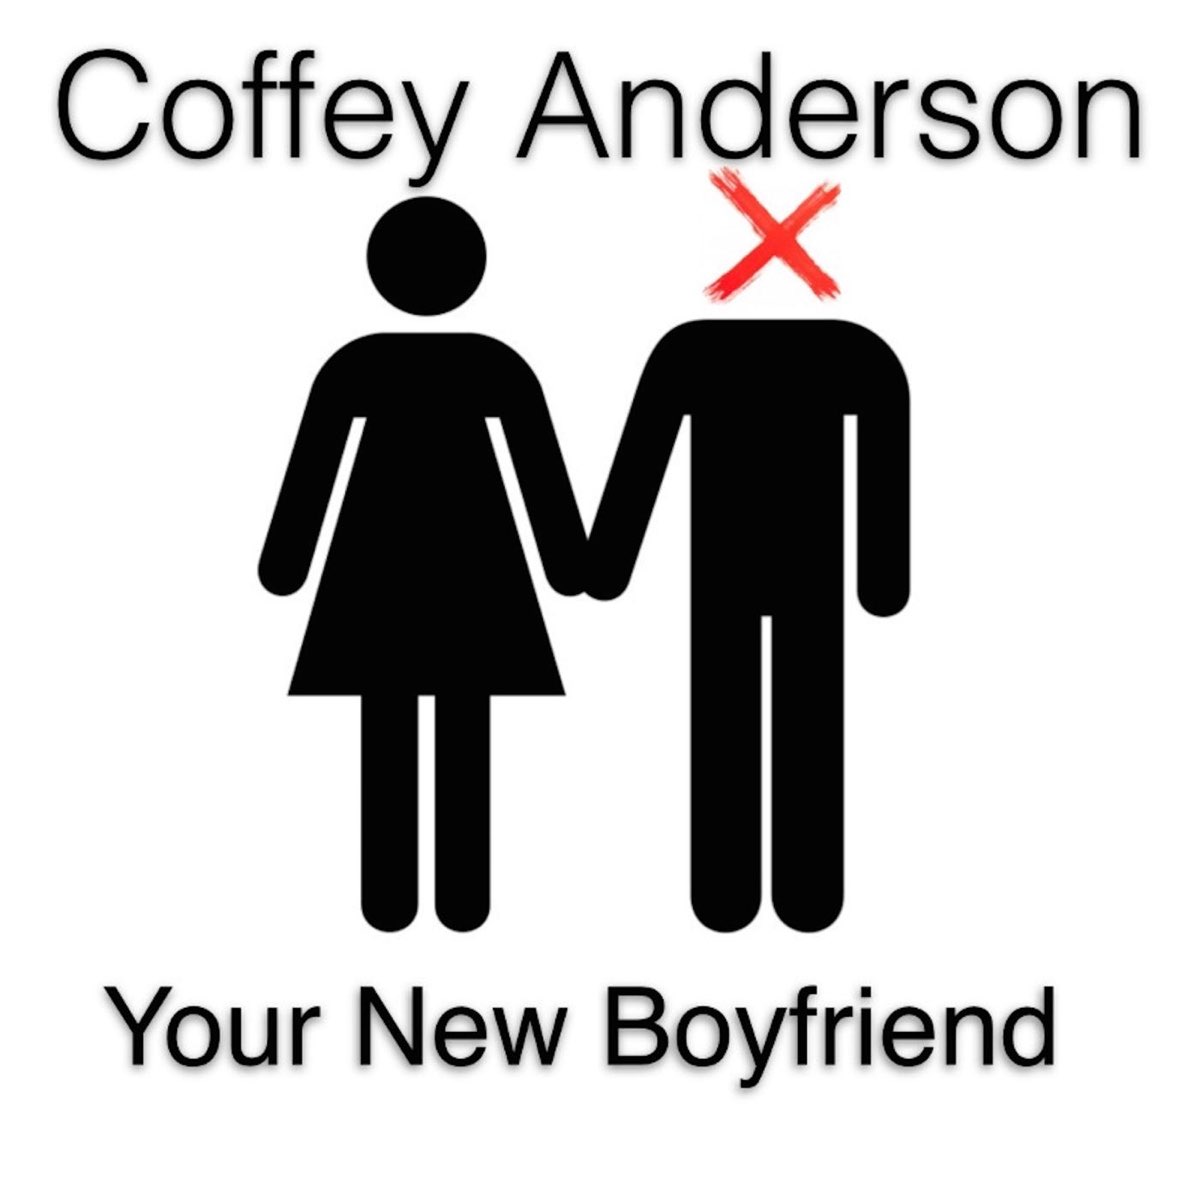 Your new boyfriend. Coffey Anderson. Your New boyfriend Ноты. Wilbur Soot your New boyfriend.